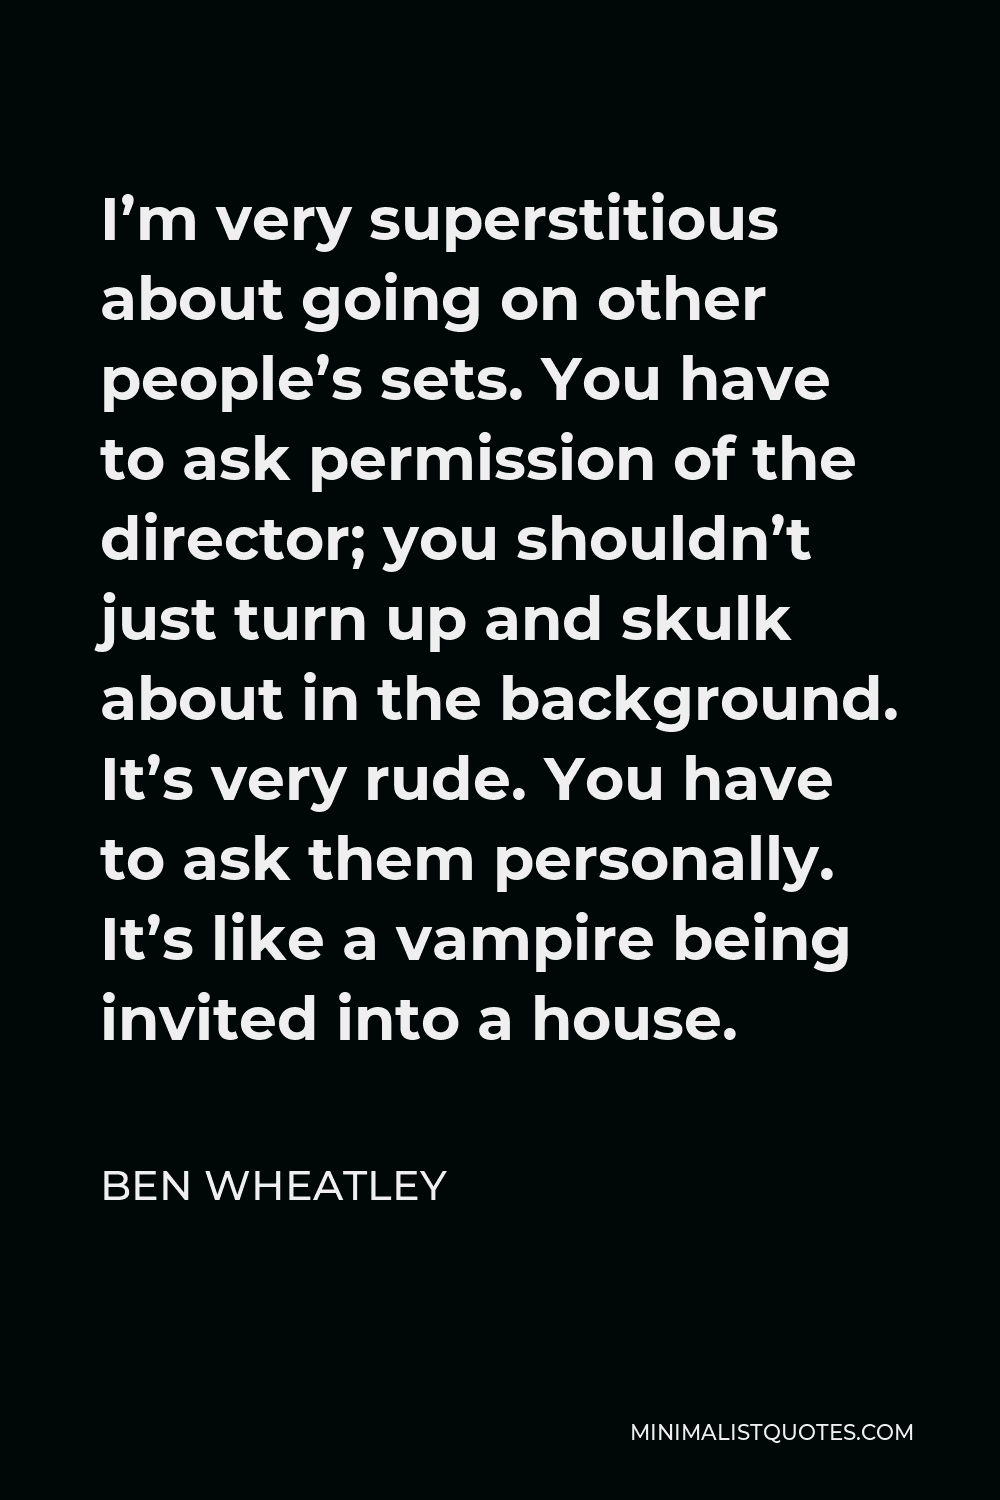 Ben Wheatley Quote - I’m very superstitious about going on other people’s sets. You have to ask permission of the director; you shouldn’t just turn up and skulk about in the background. It’s very rude. You have to ask them personally. It’s like a vampire being invited into a house.